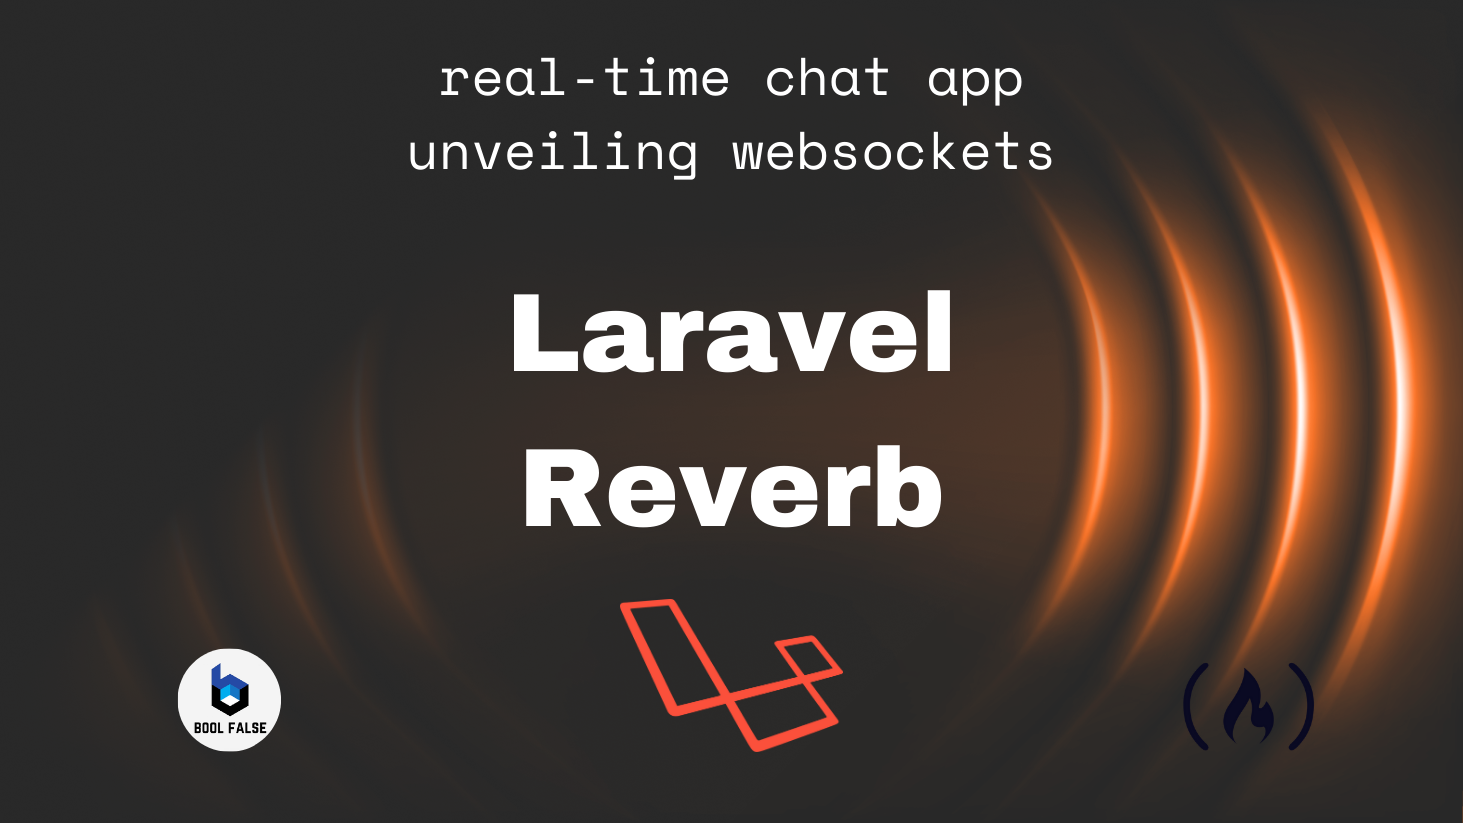 How to Build a Real-Time Chat App with Laravel Reverb